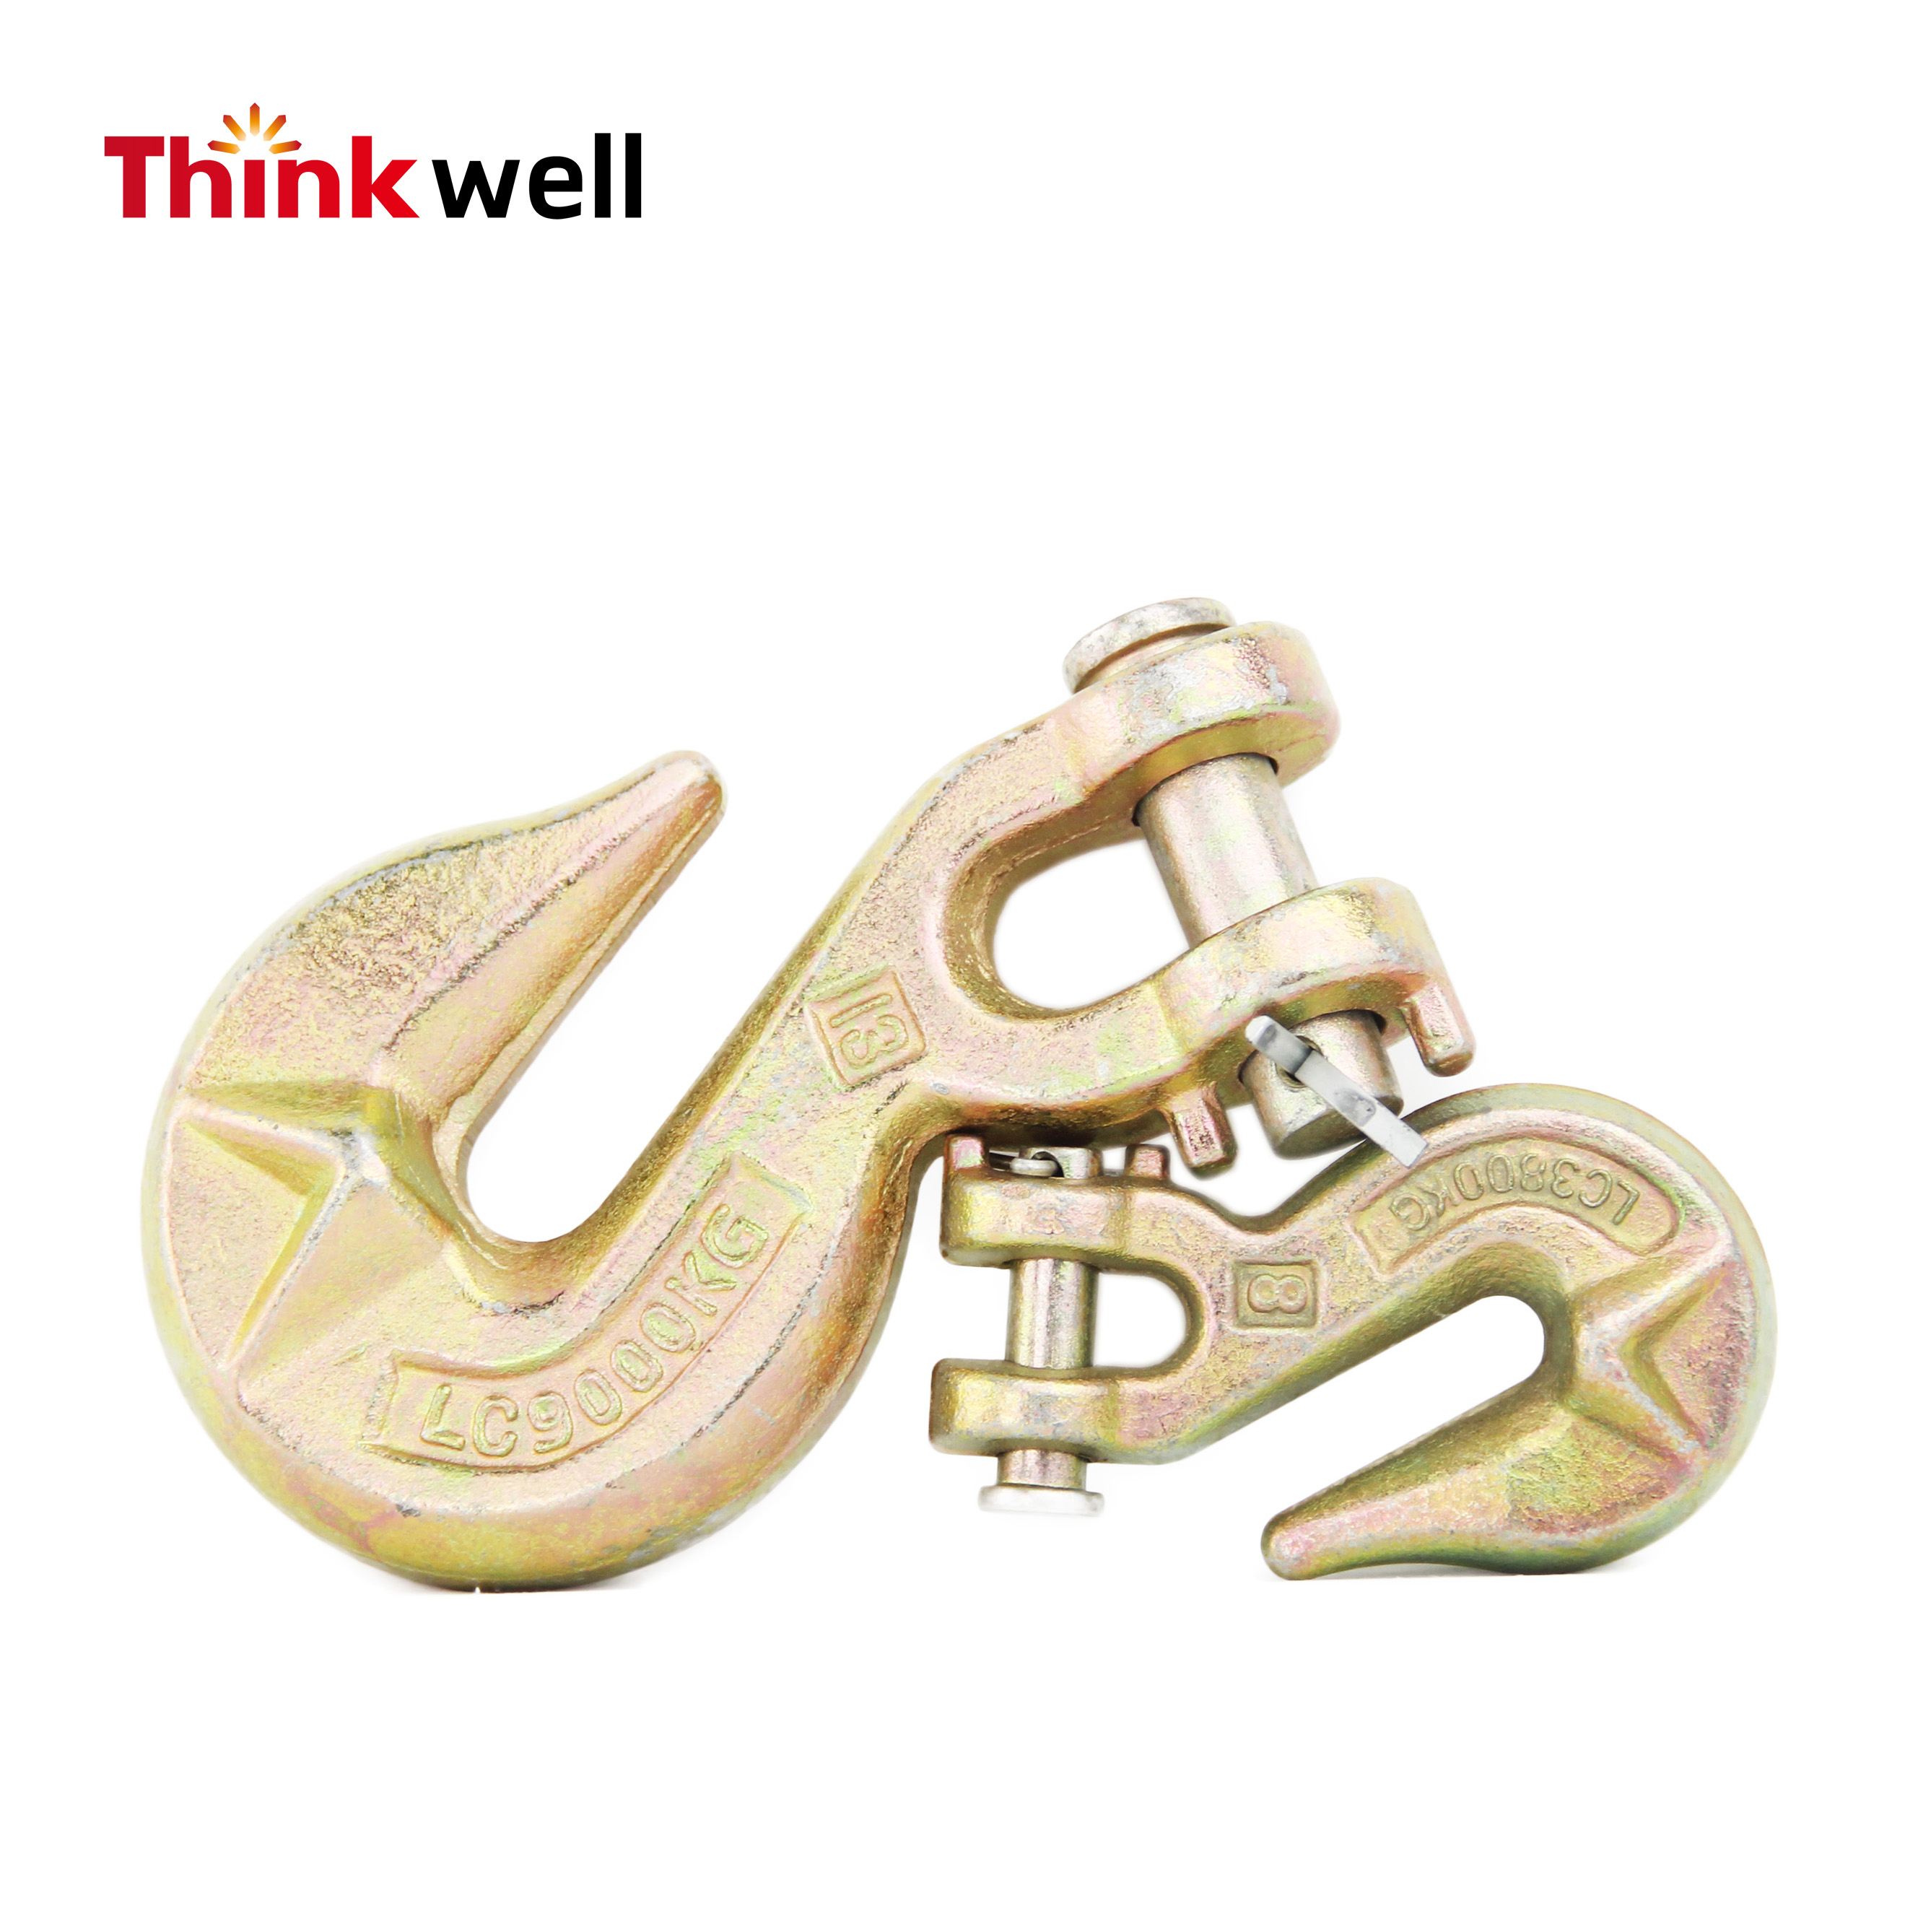 High Quality Forged Austrialia Clevis Hook 